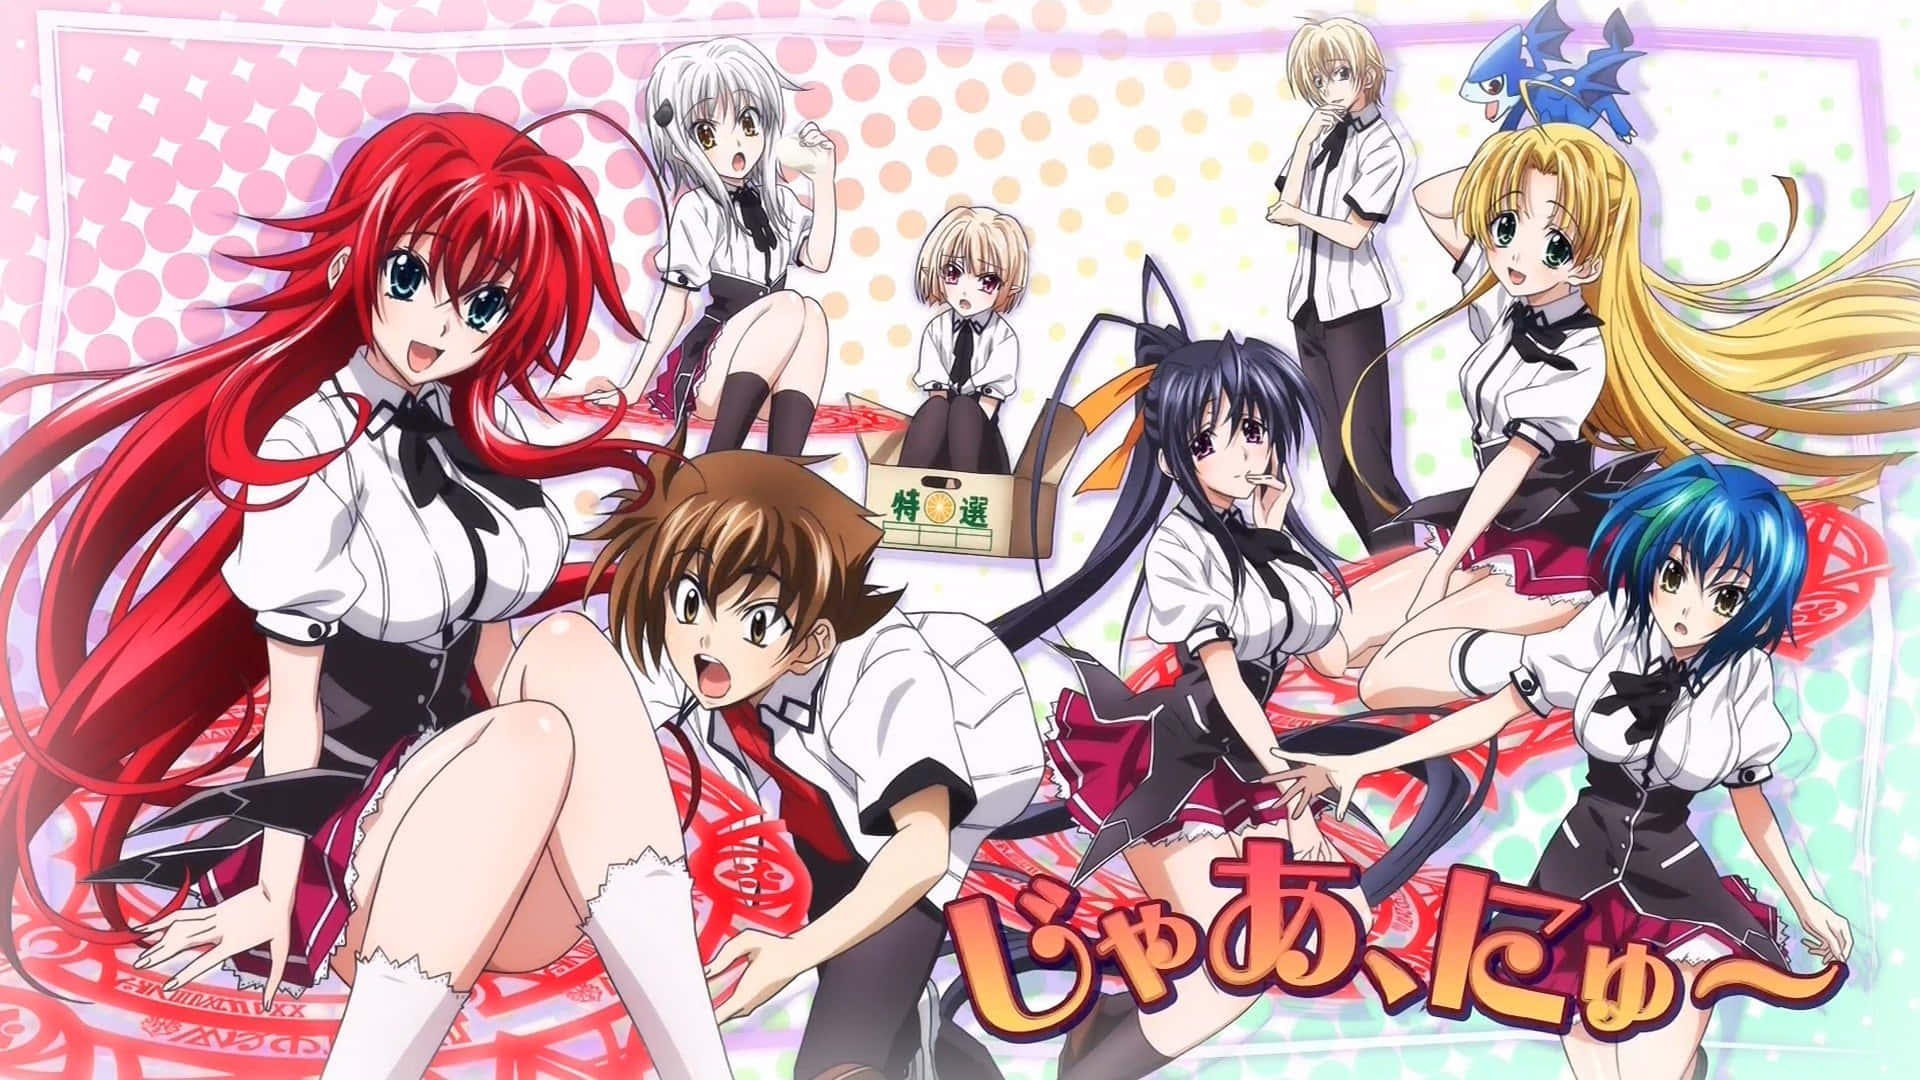 Rias Gremory, the alluring High School DxD character Wallpaper